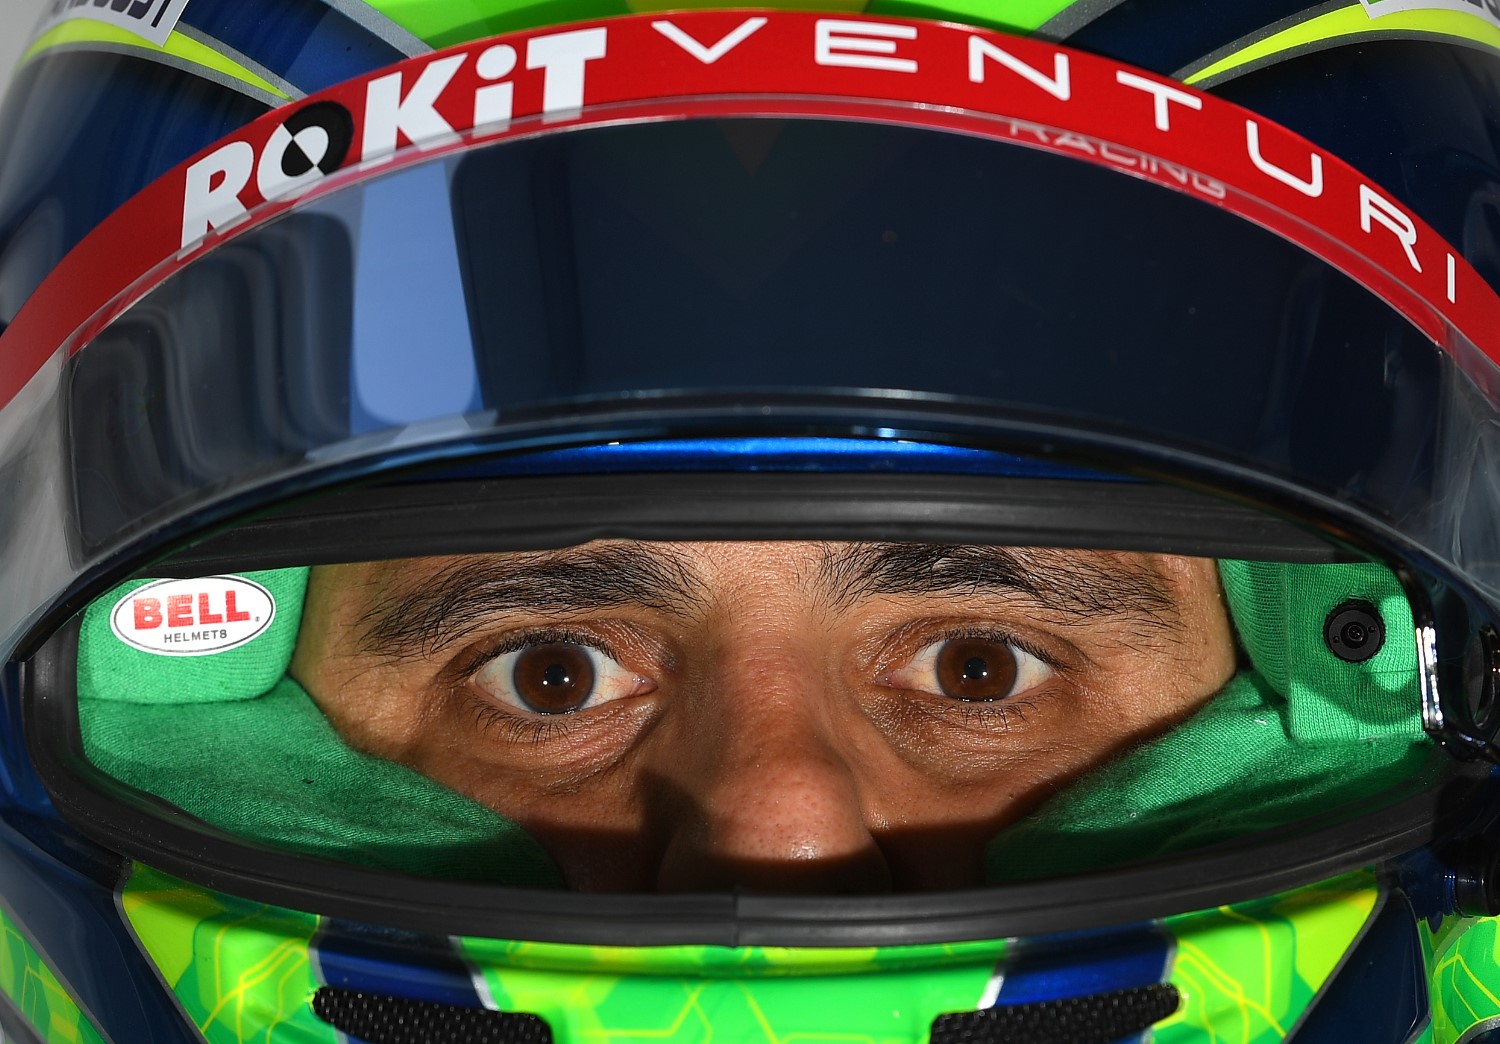 The small camera to the side of Massa's head